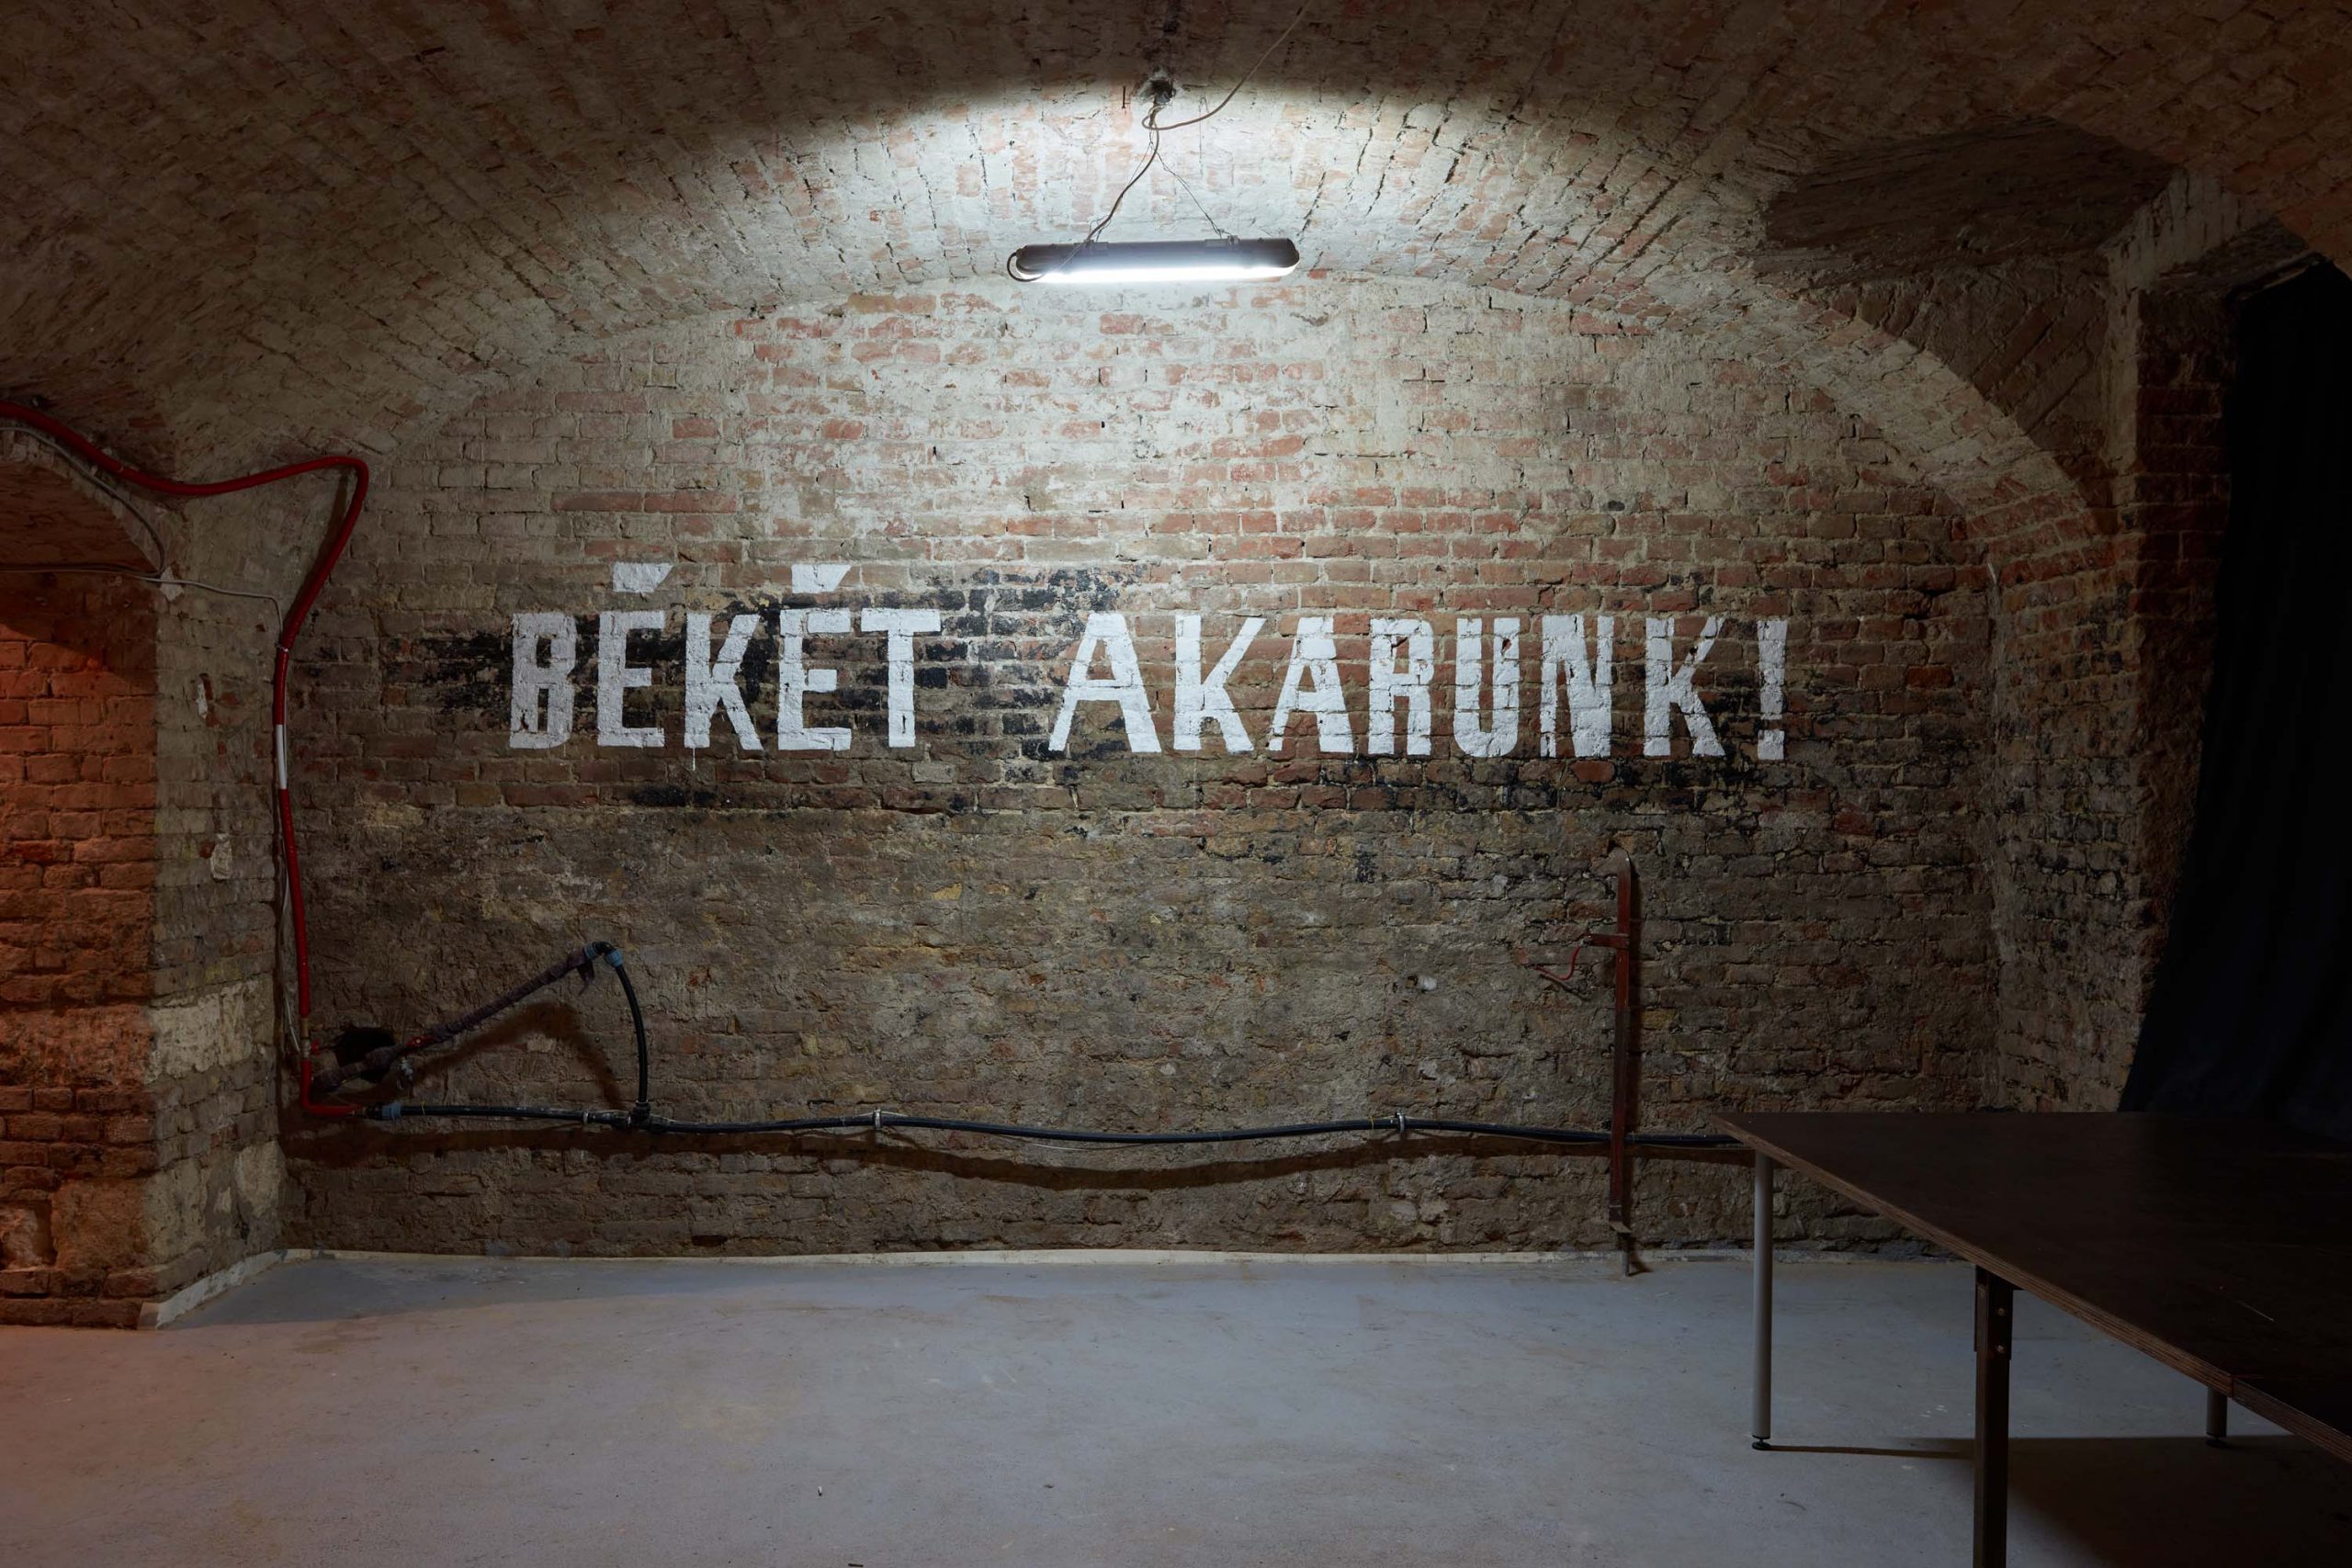 Finally We Can Learn Something, Installation view, 2020, Kisterem
Work by Tamás Kaszás